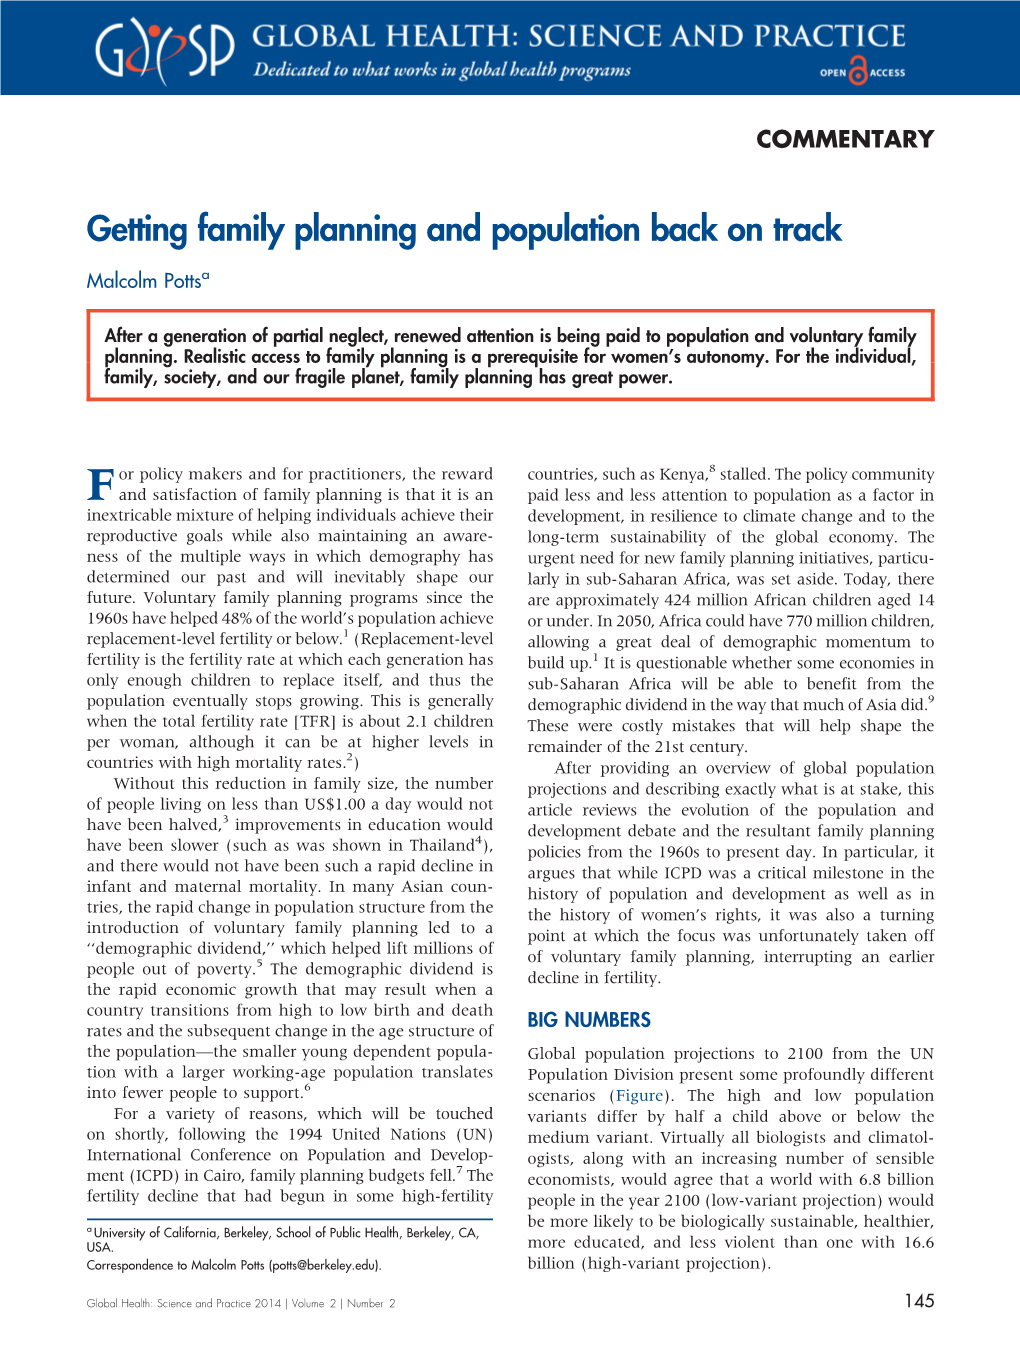 Getting Family Planning and Population Back on Track